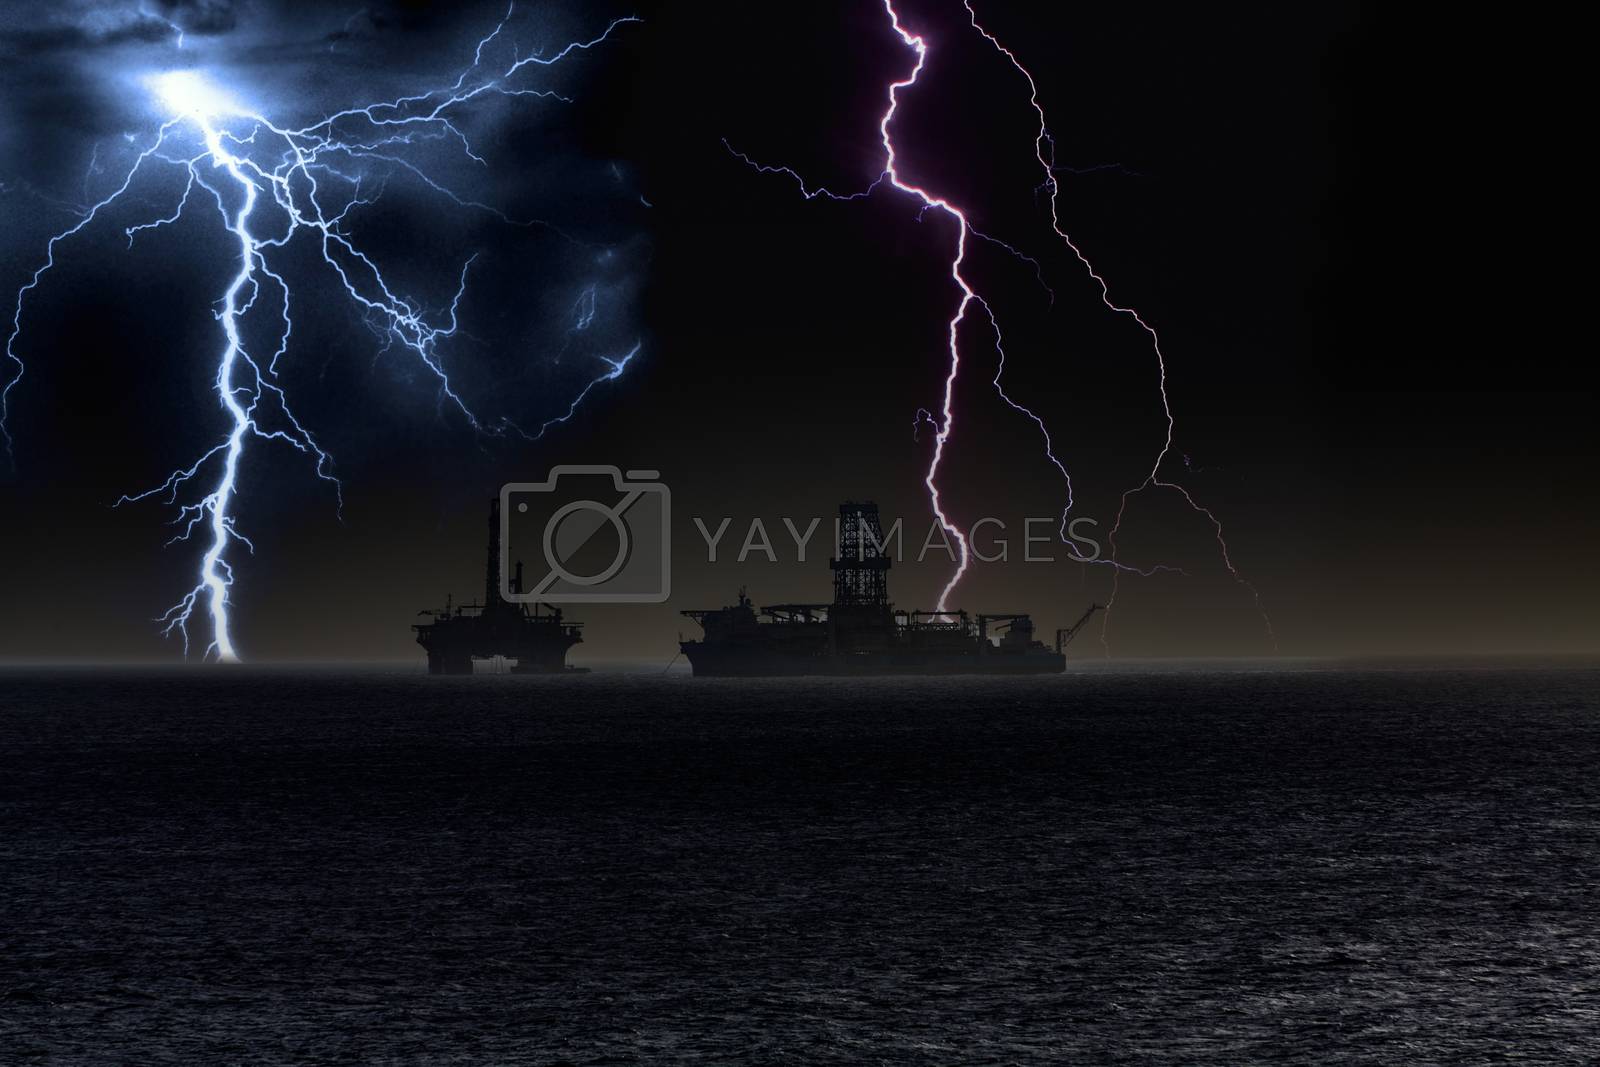 Royalty free image of Floating Oil Rigs on Ocean in Storm by dbvirago